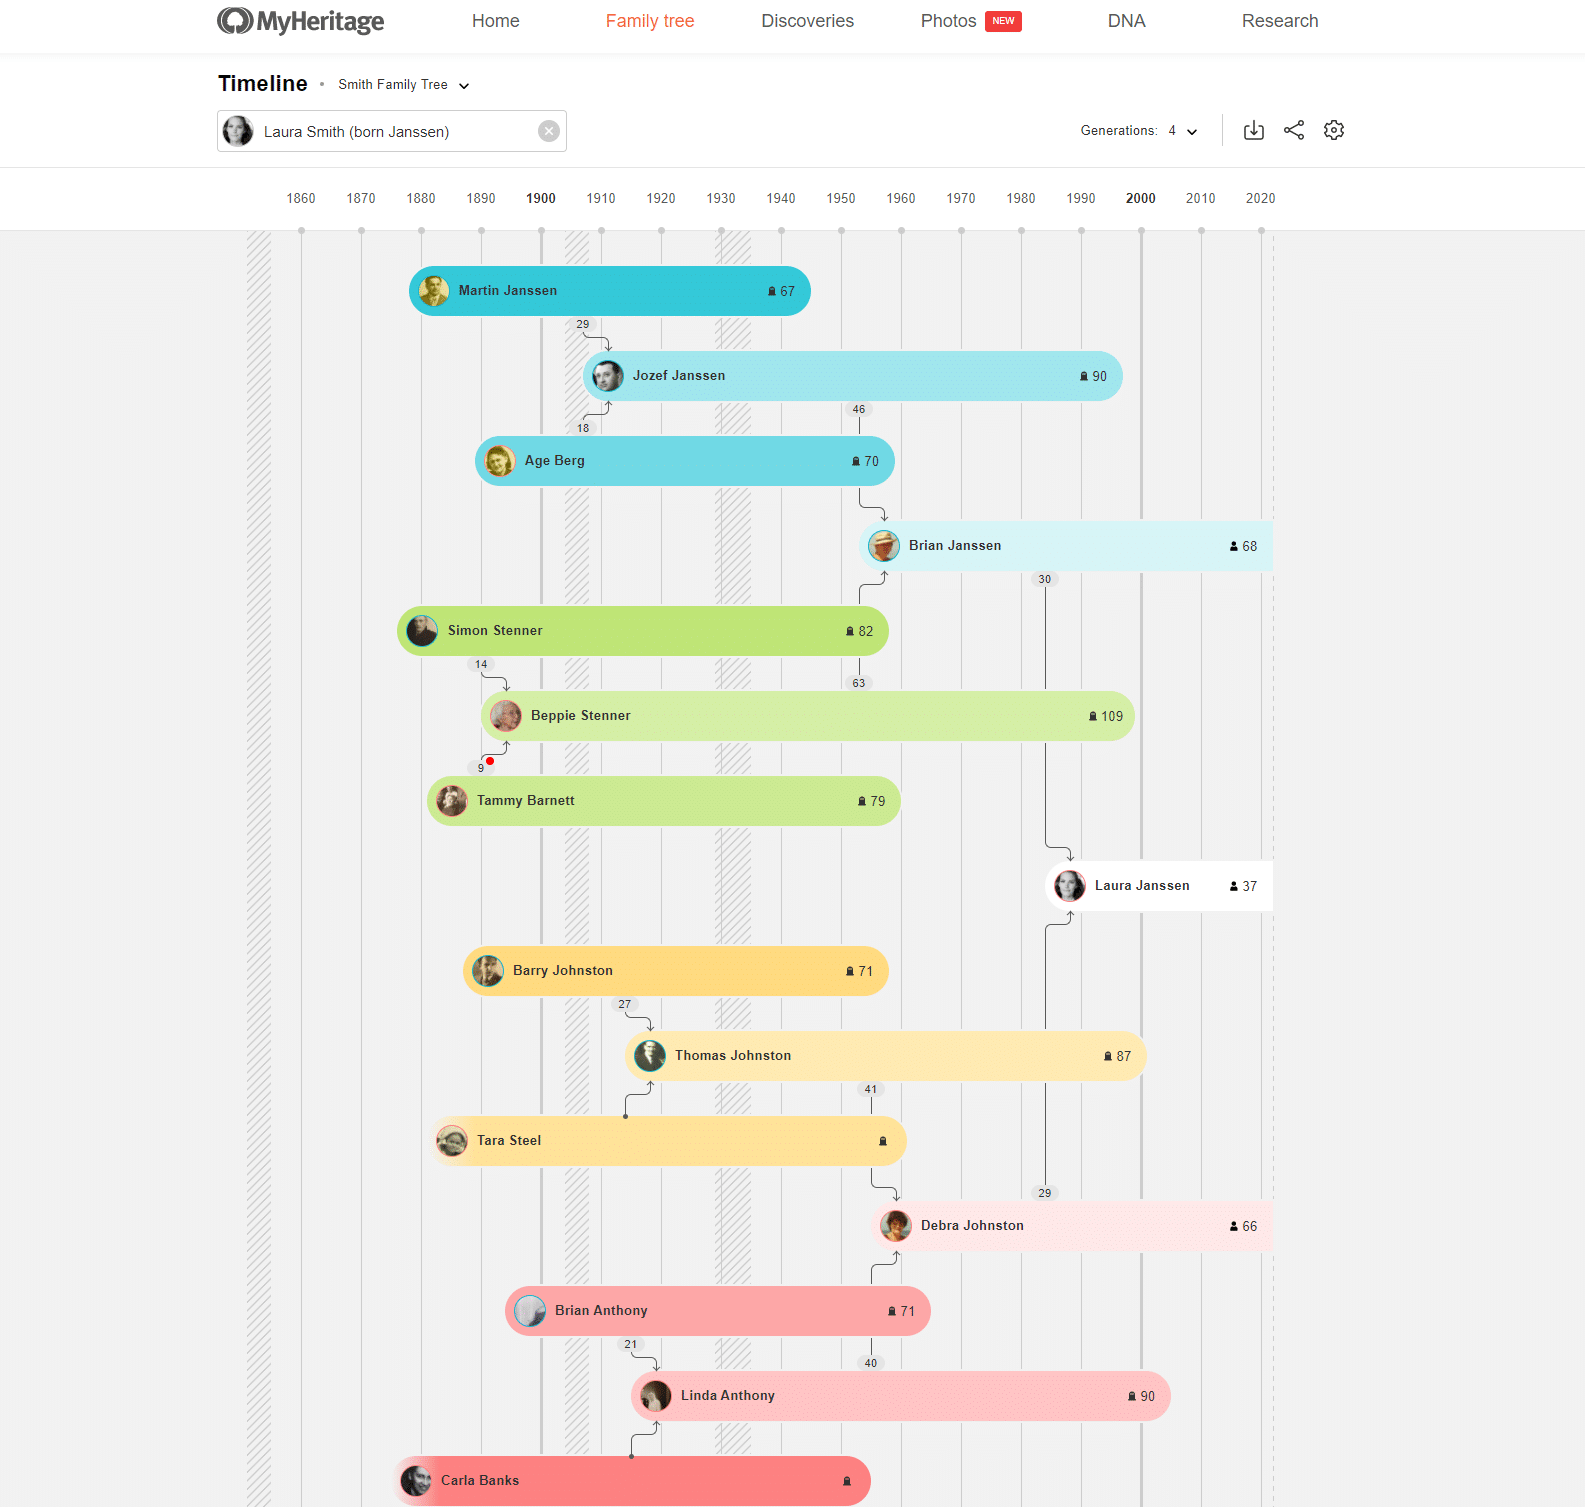 Family Tree Timeline with 4 generations (Click to zoom)